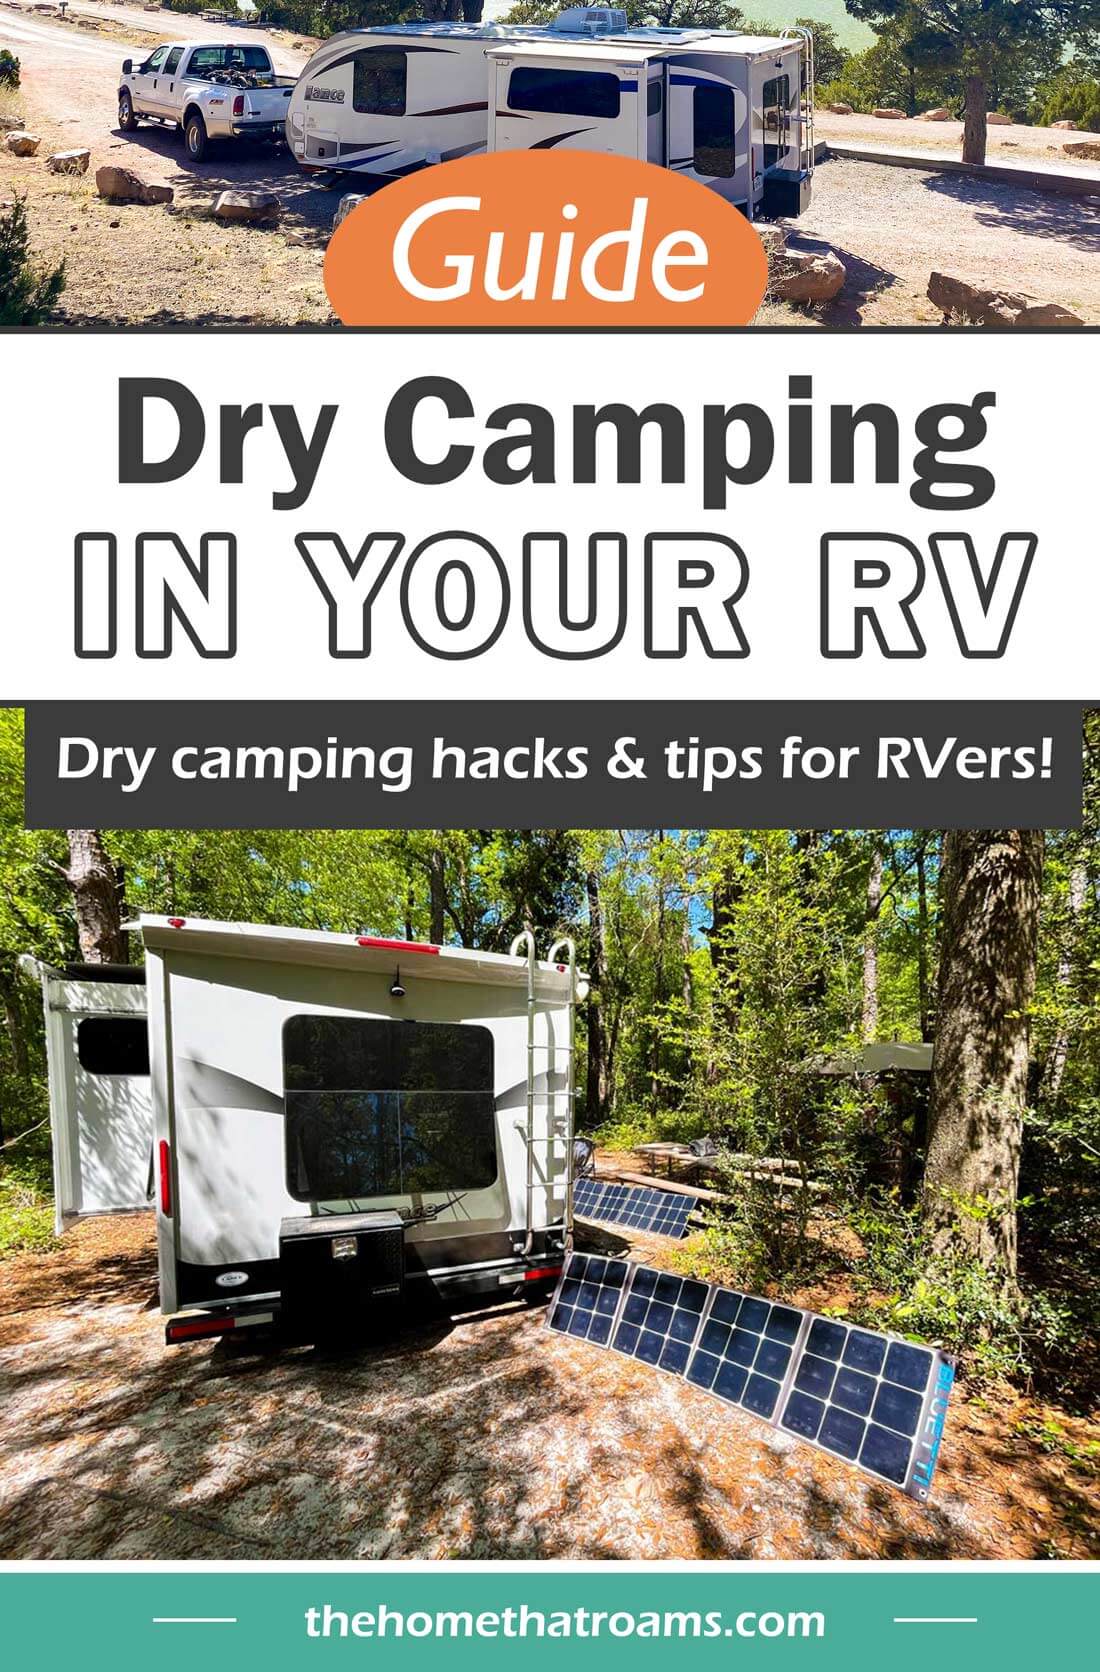 7 Helpful Tips for Dry Camping in an RV